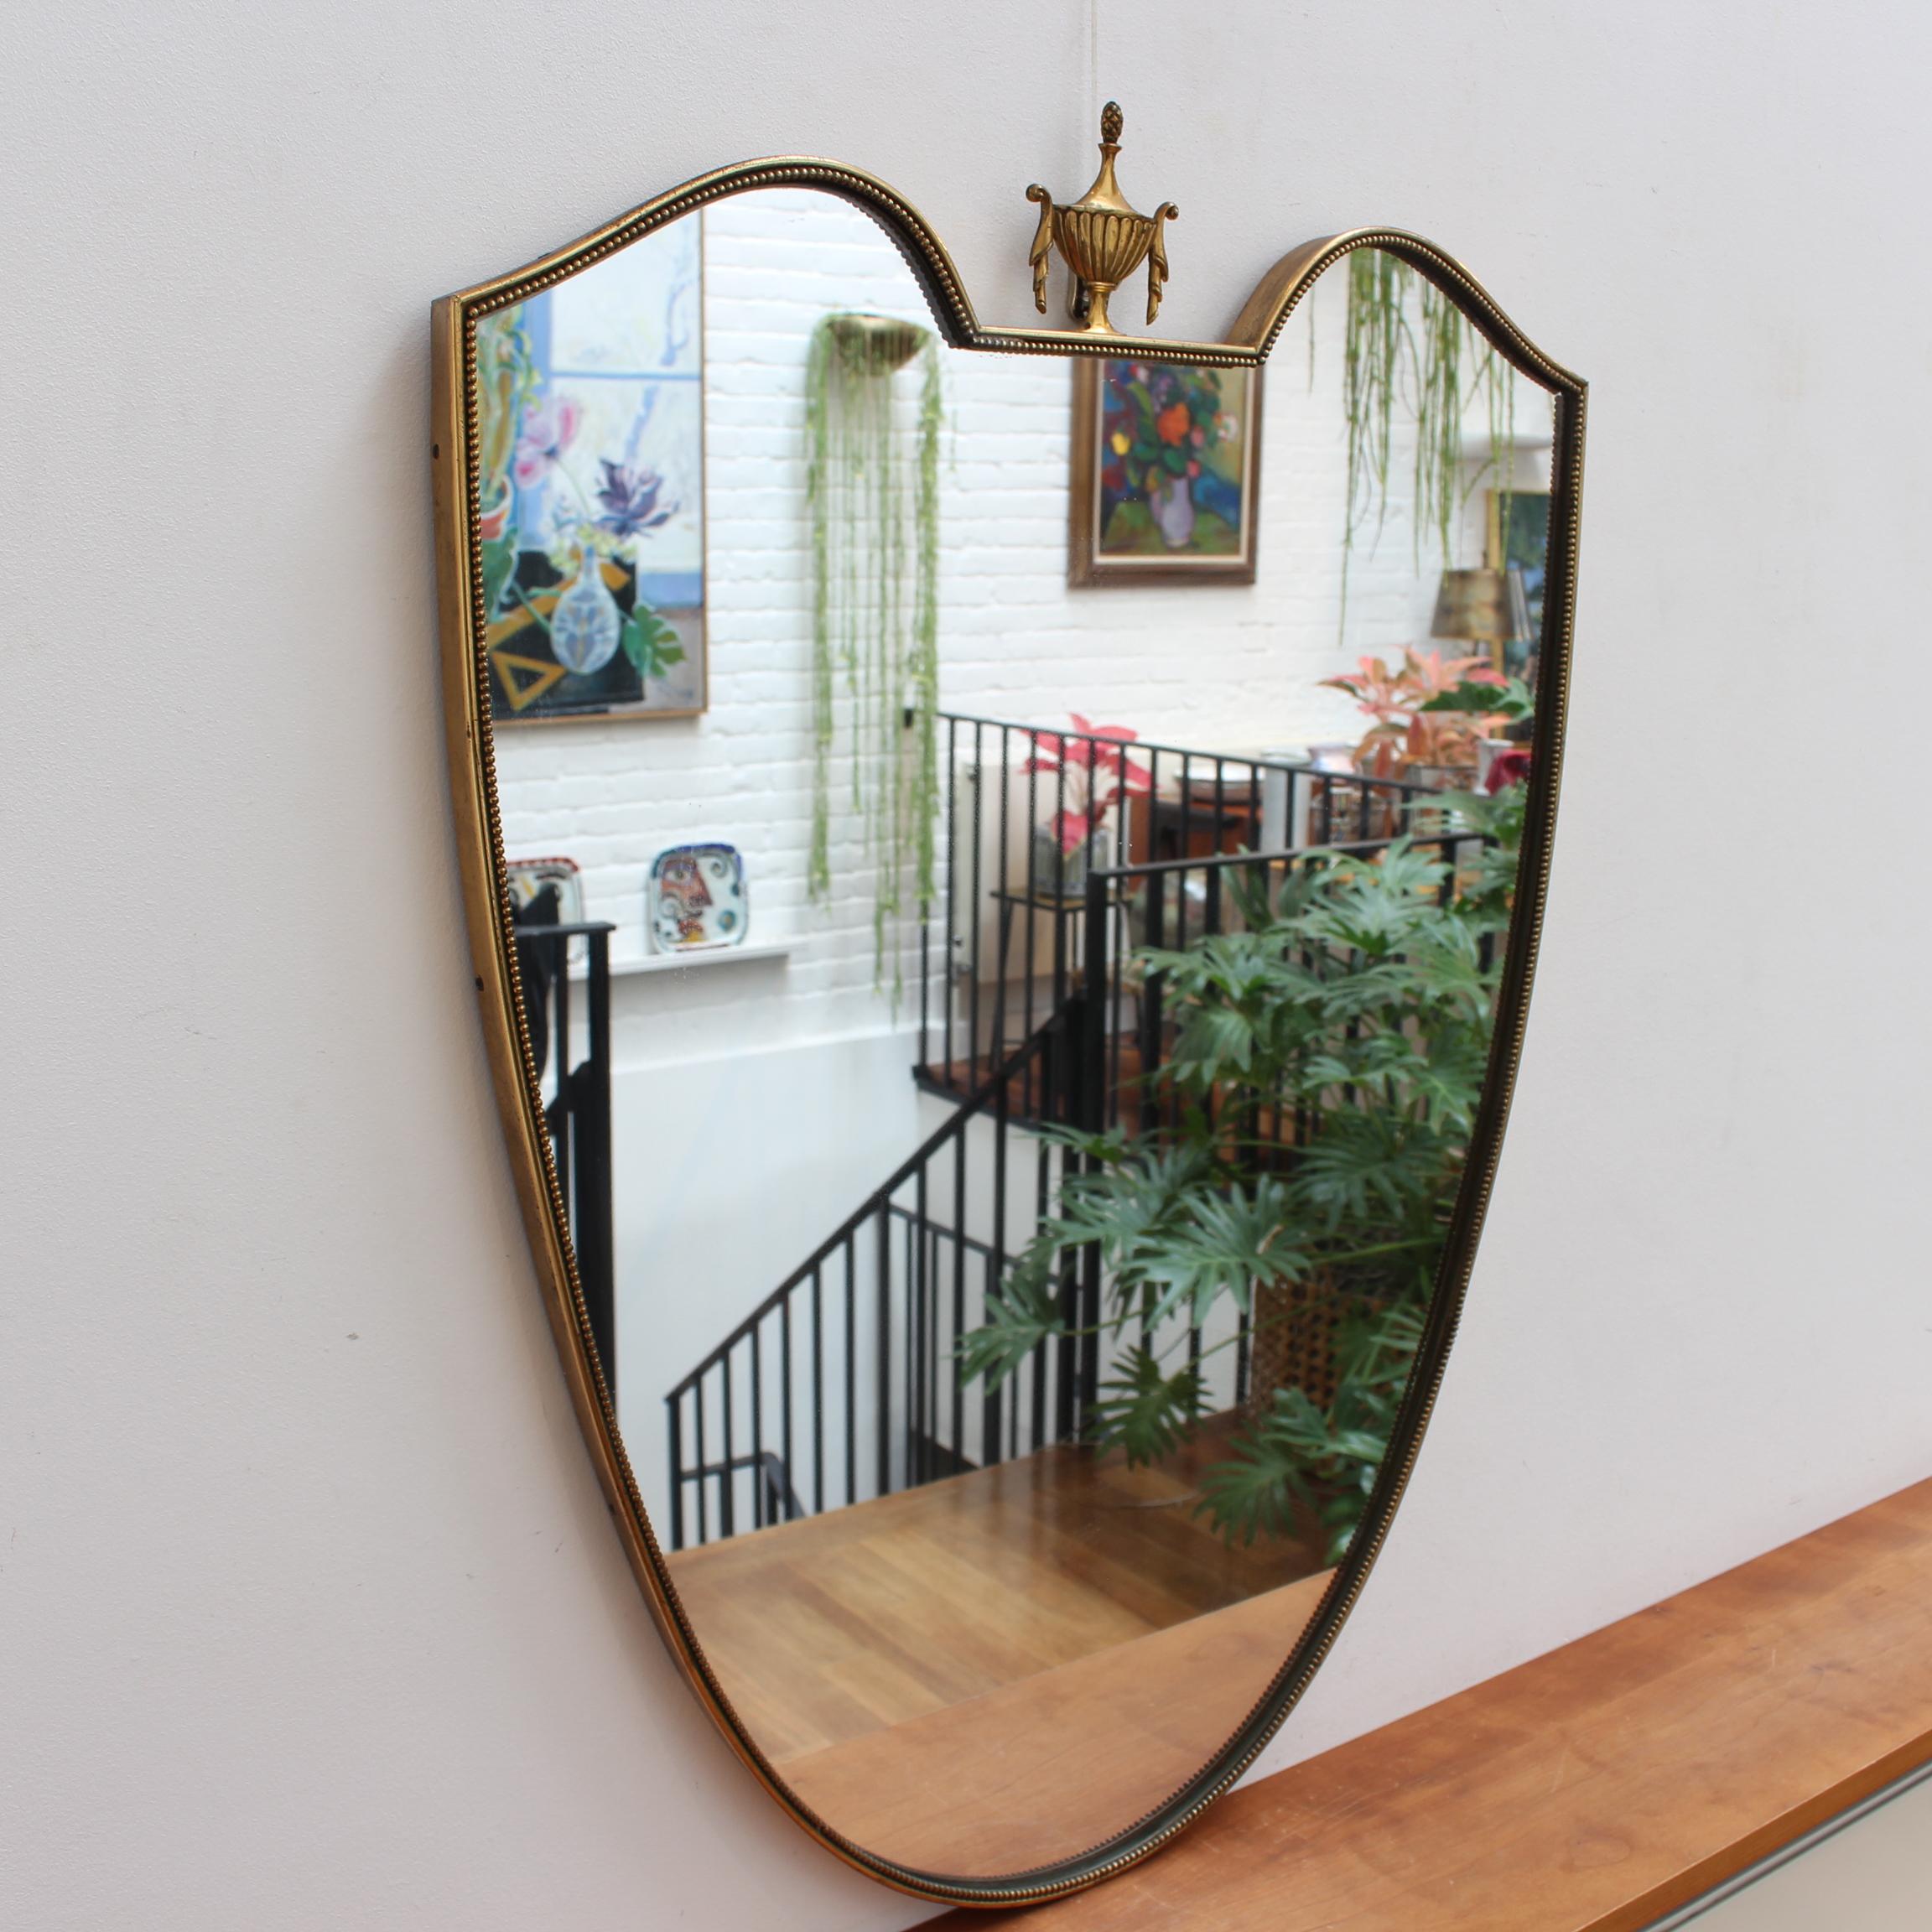 Vintage Italian wall mirror with brass frame with beading and decorative crowning (circa 1950s). The mirror is a crest shape with a rare crowning feature which delights the viewer as an unexpected surprise. Always classically elegant in a modern Gio